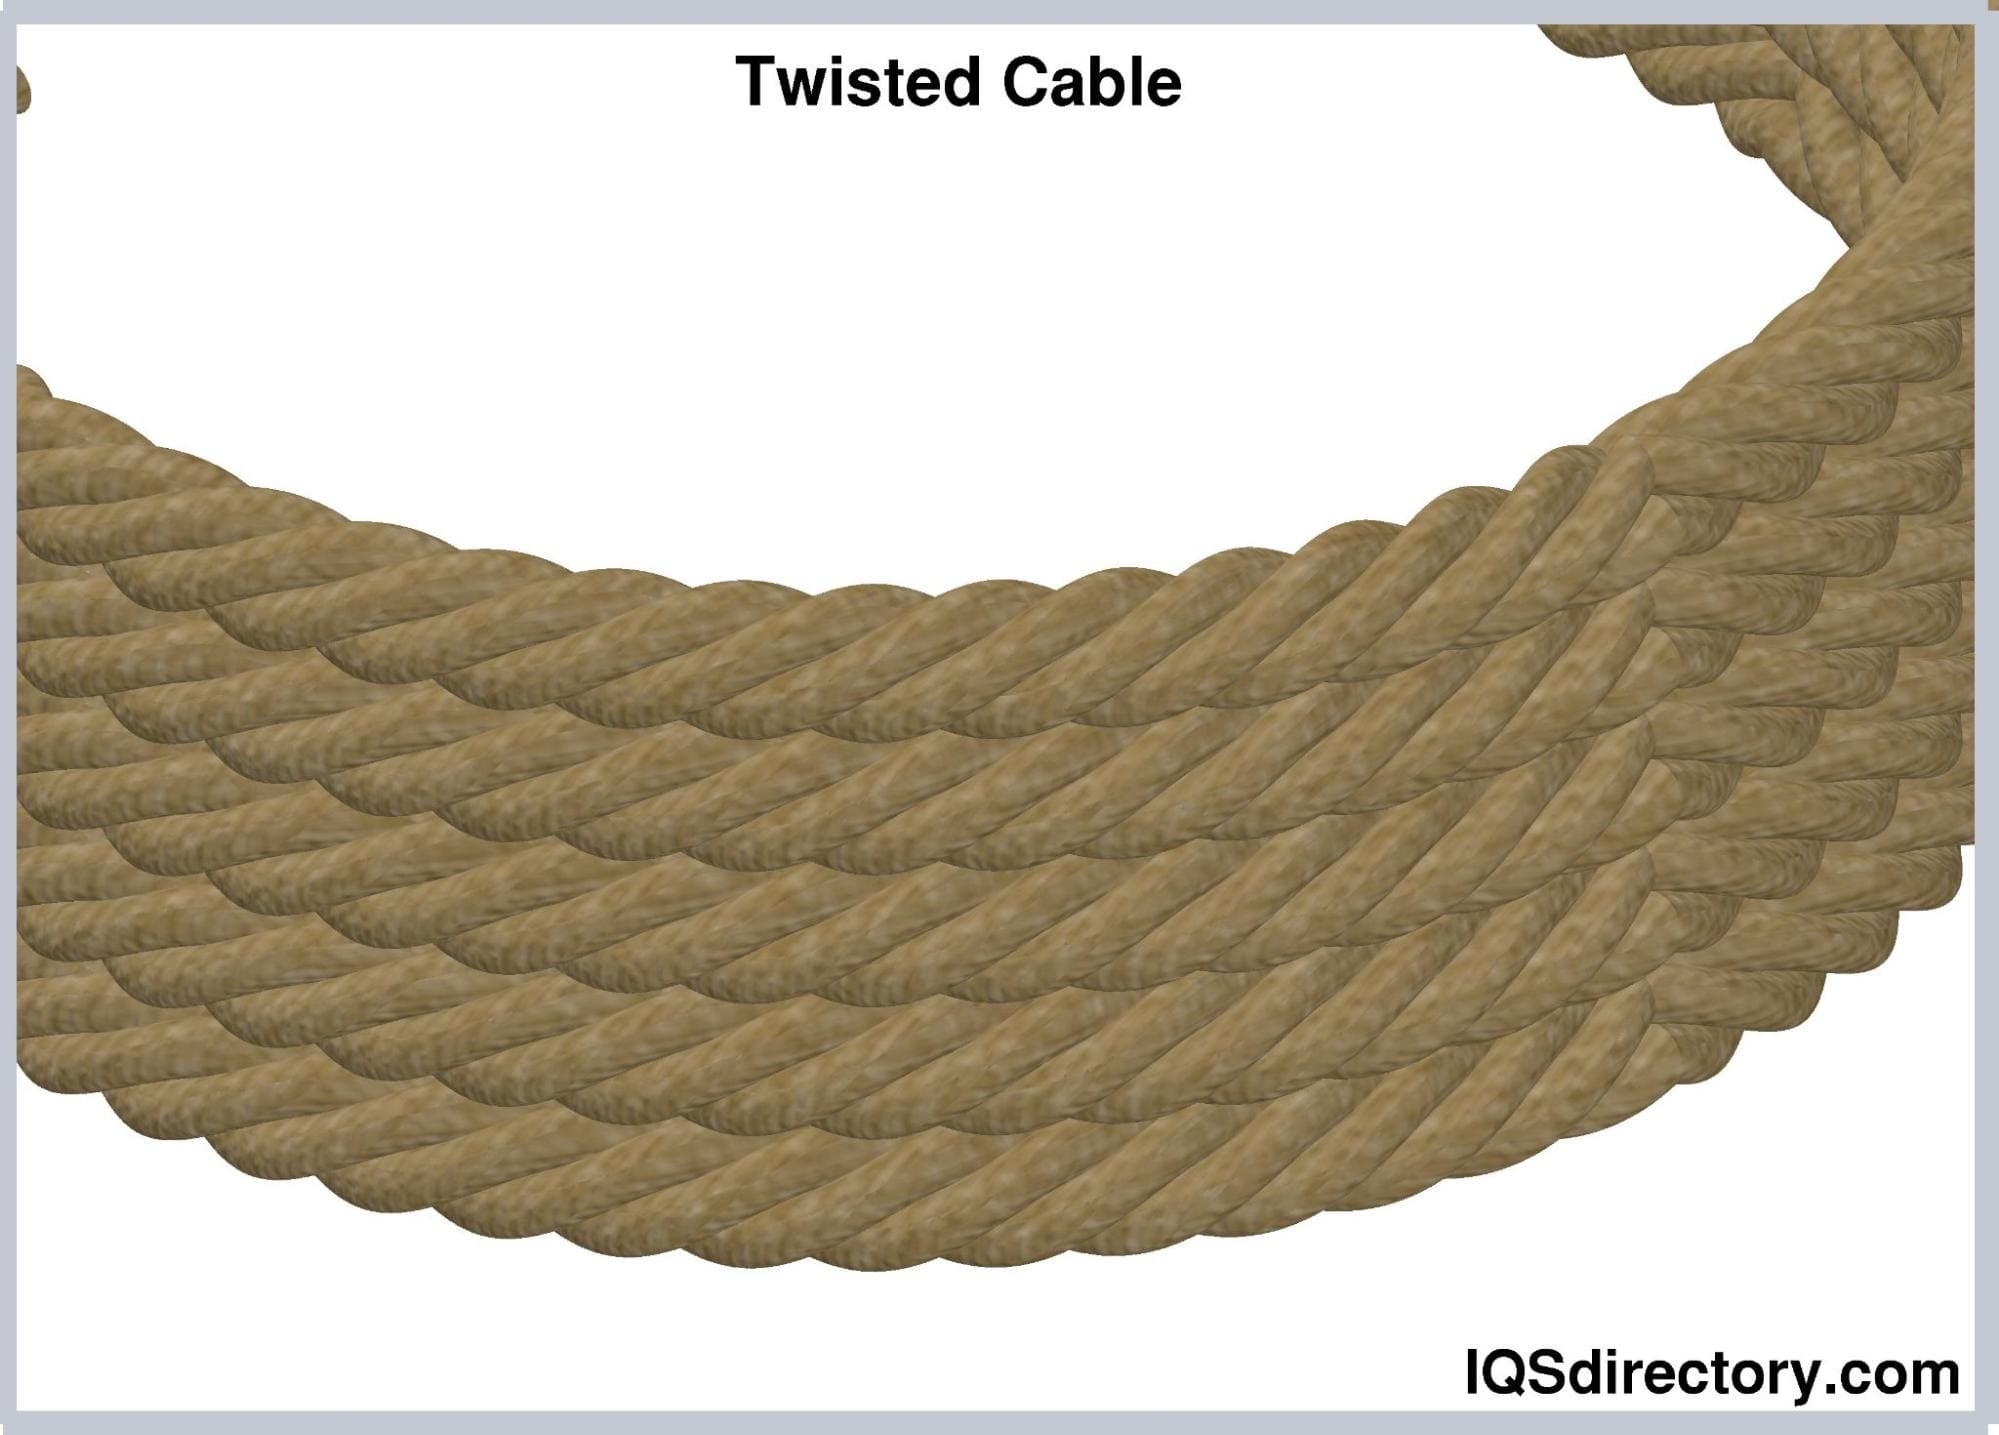 Twisted Cable